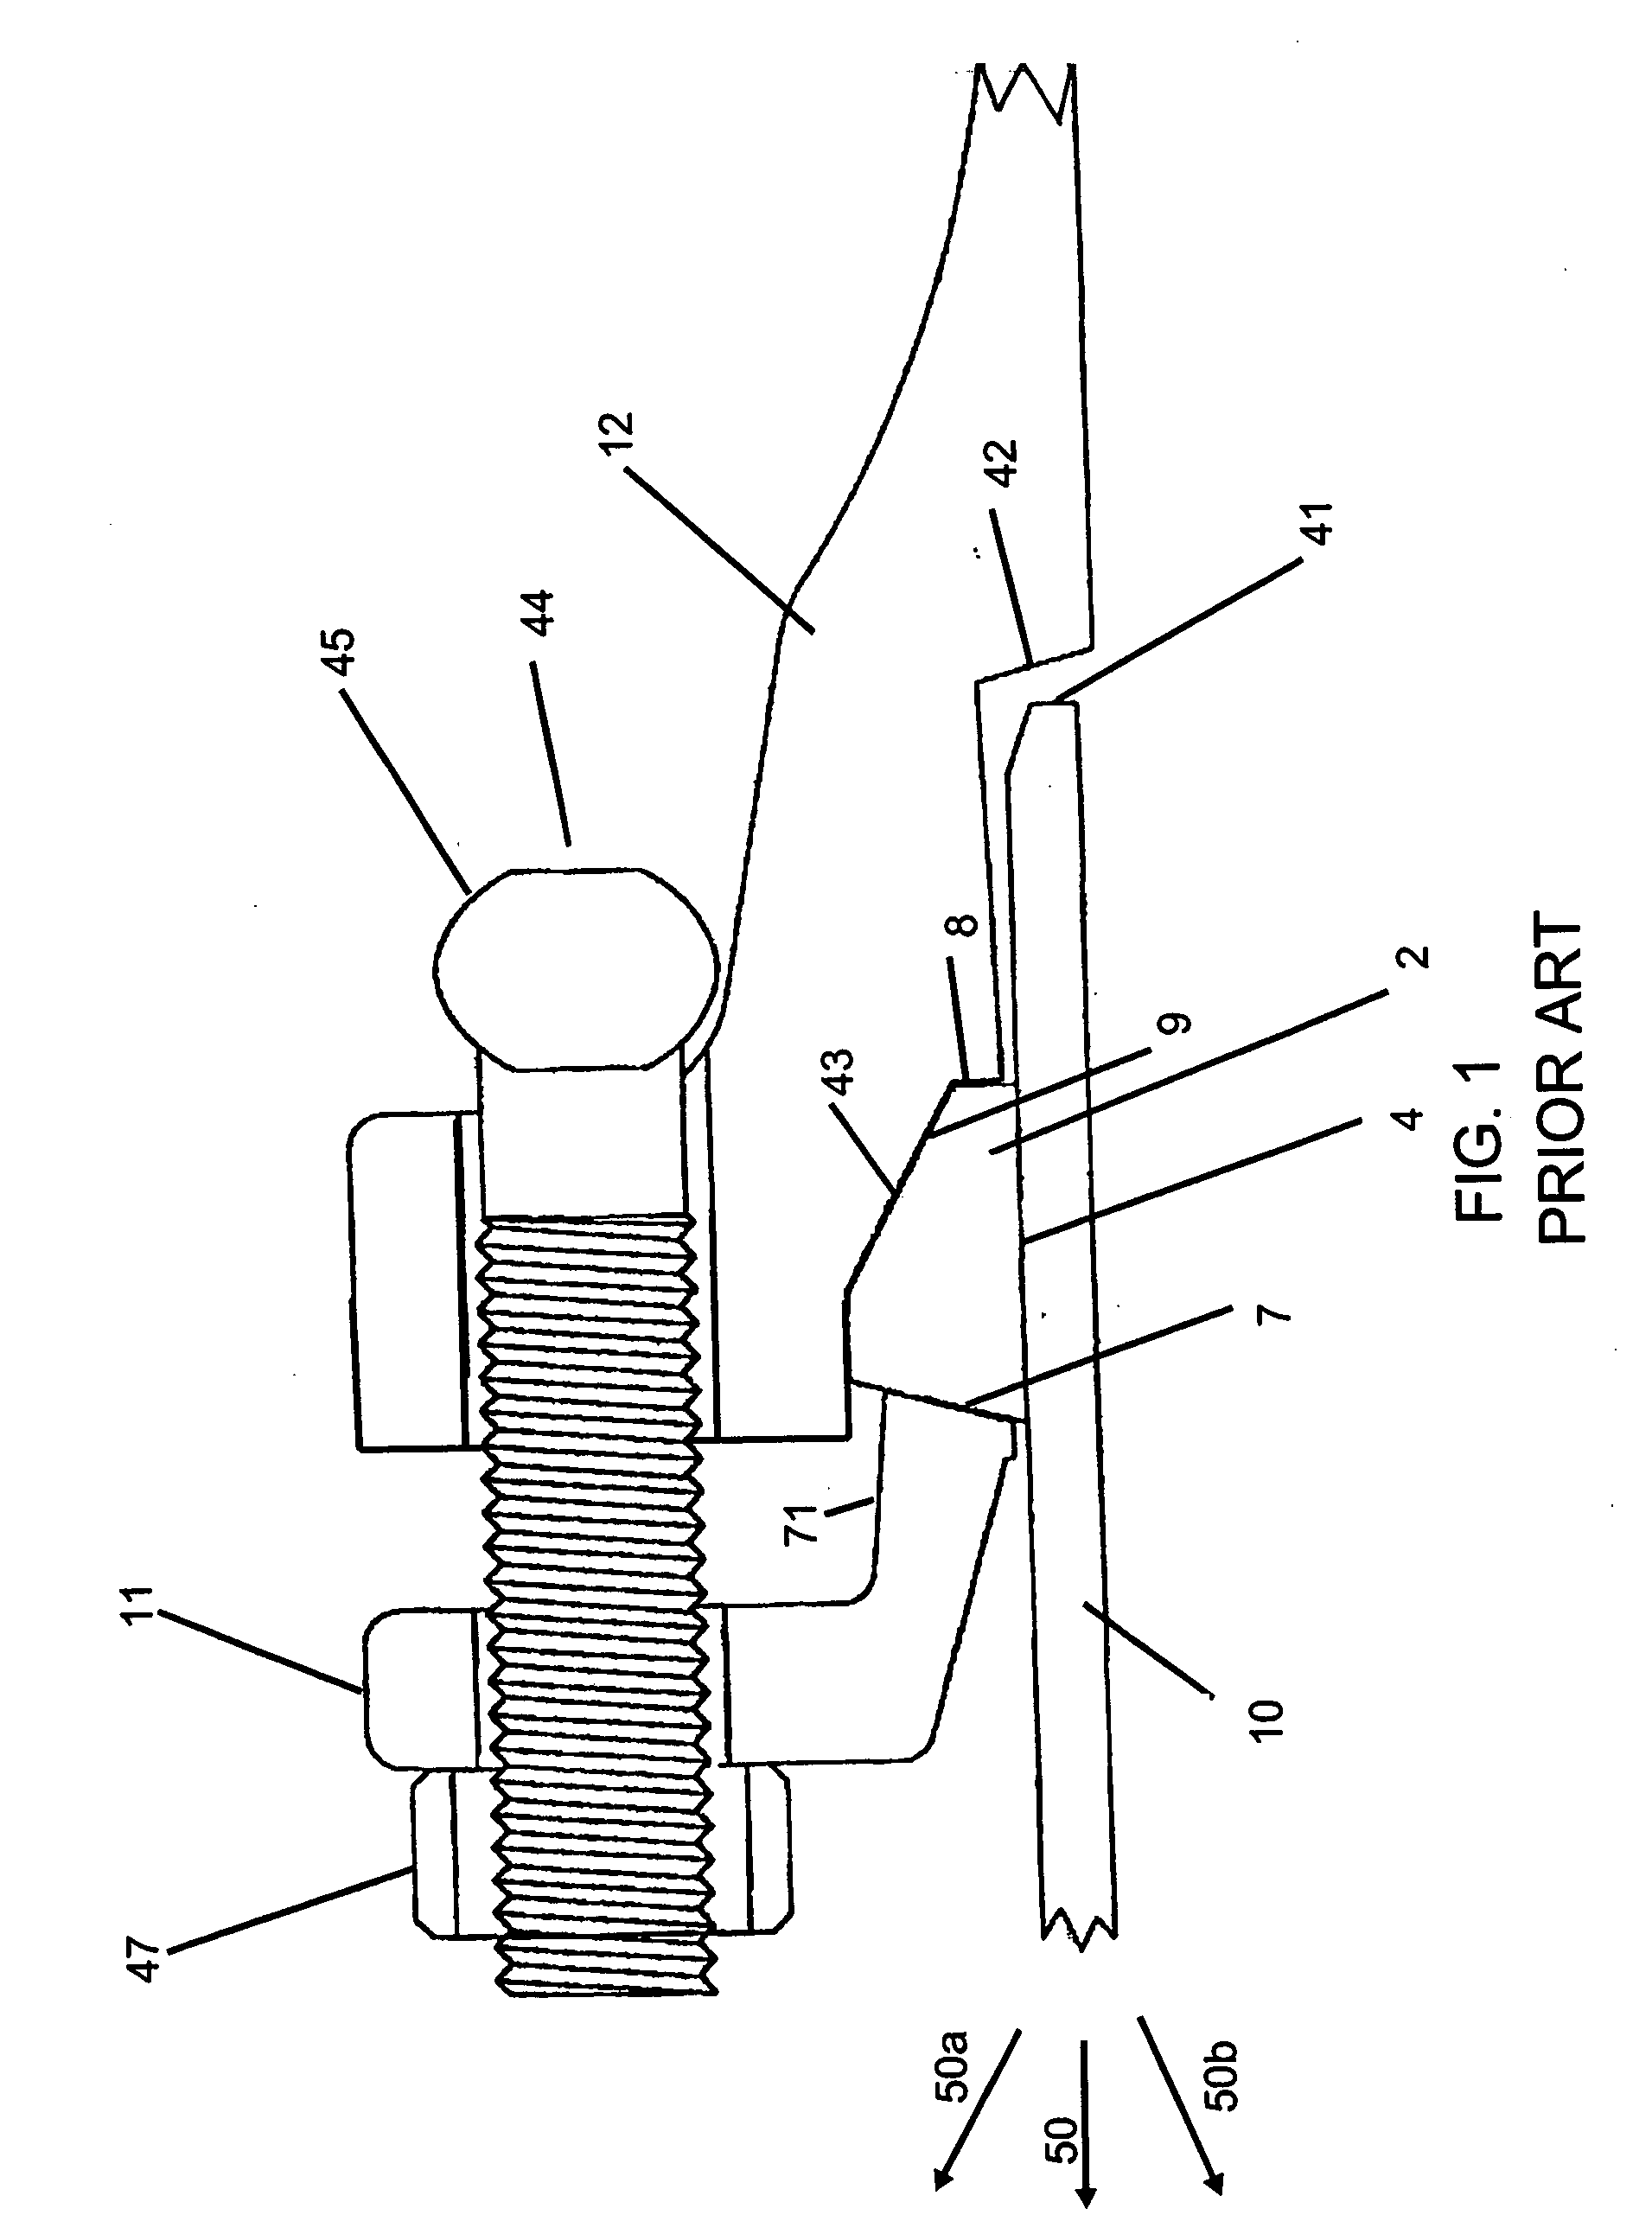 Restraining gasket for mechanical joints of pipes